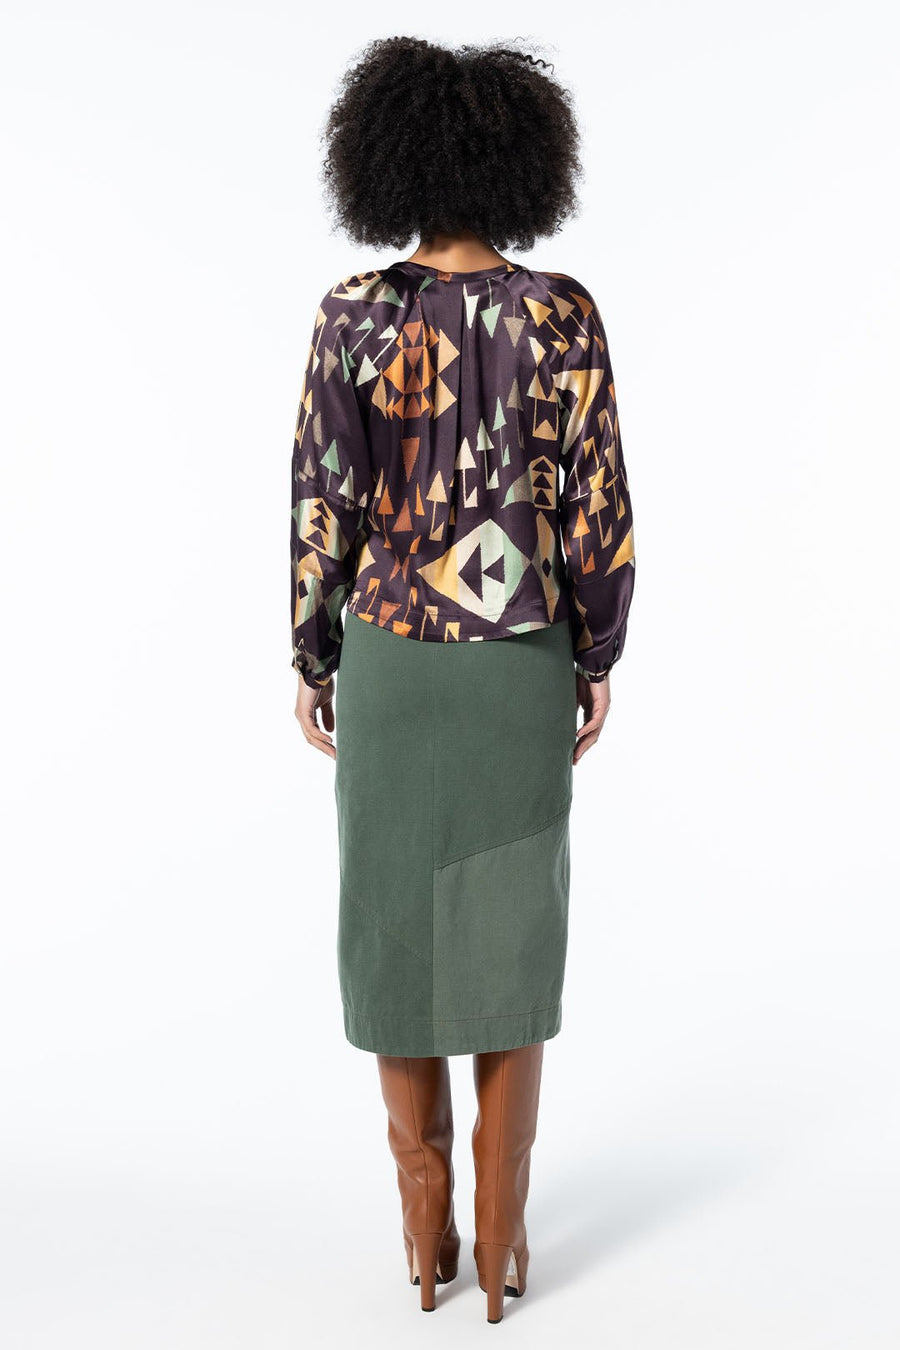 LOVE NOT WAR ARMY SKIRT, ARMY - Burning Torch Online Boutique